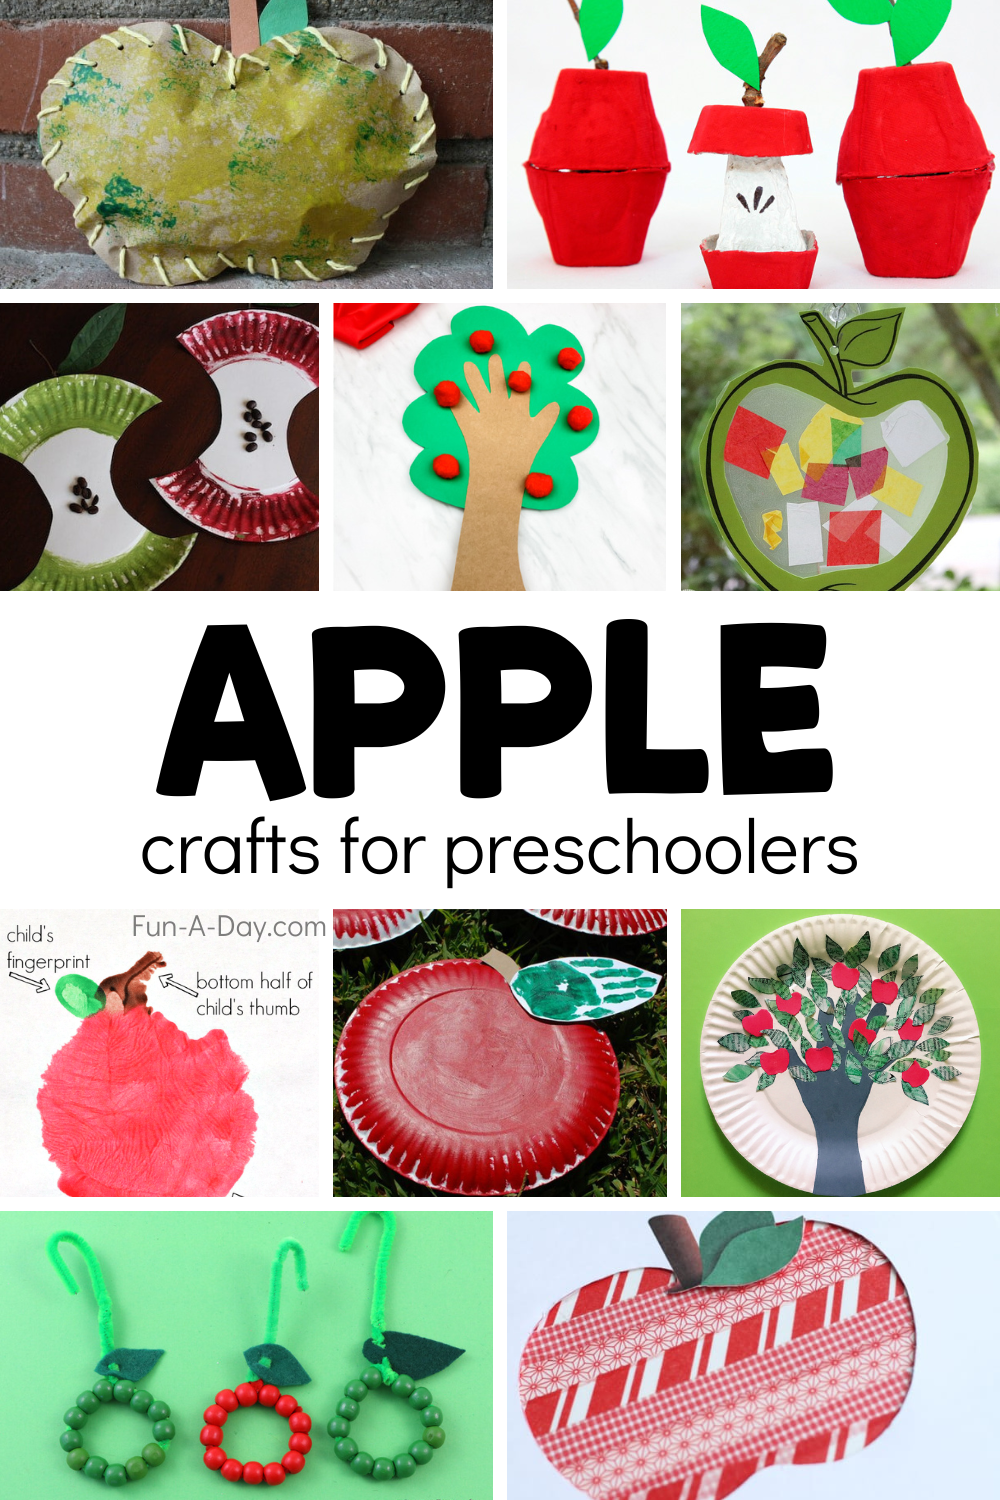 Many crafty apple ideas with text that reads apple crafts for preschoolers